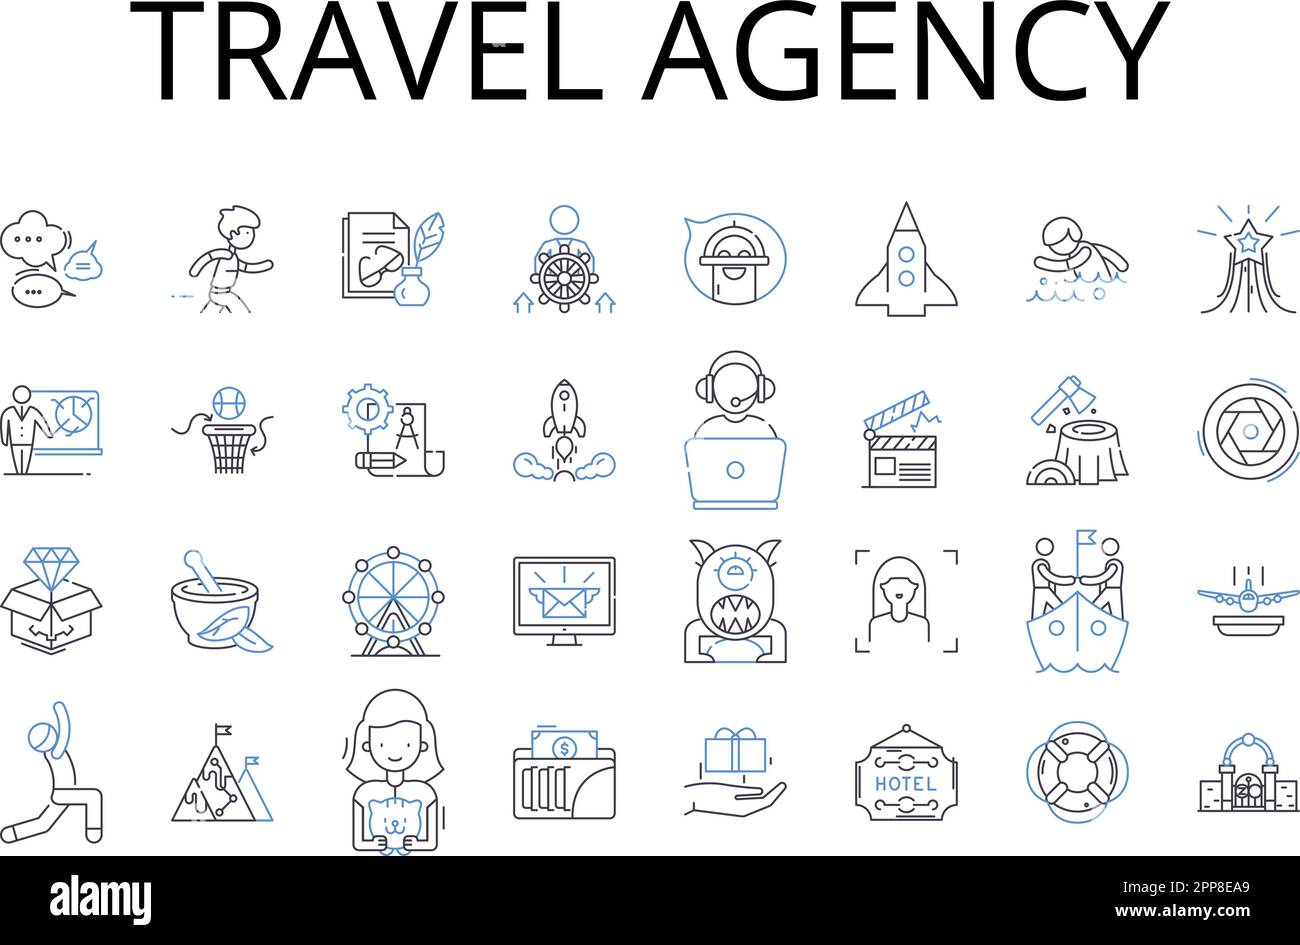 Travel agency line icons collection. Tour operator, Expedition planner, Journey management, Roaming ranger, Globe trotter, Adventure arranger Stock Vector